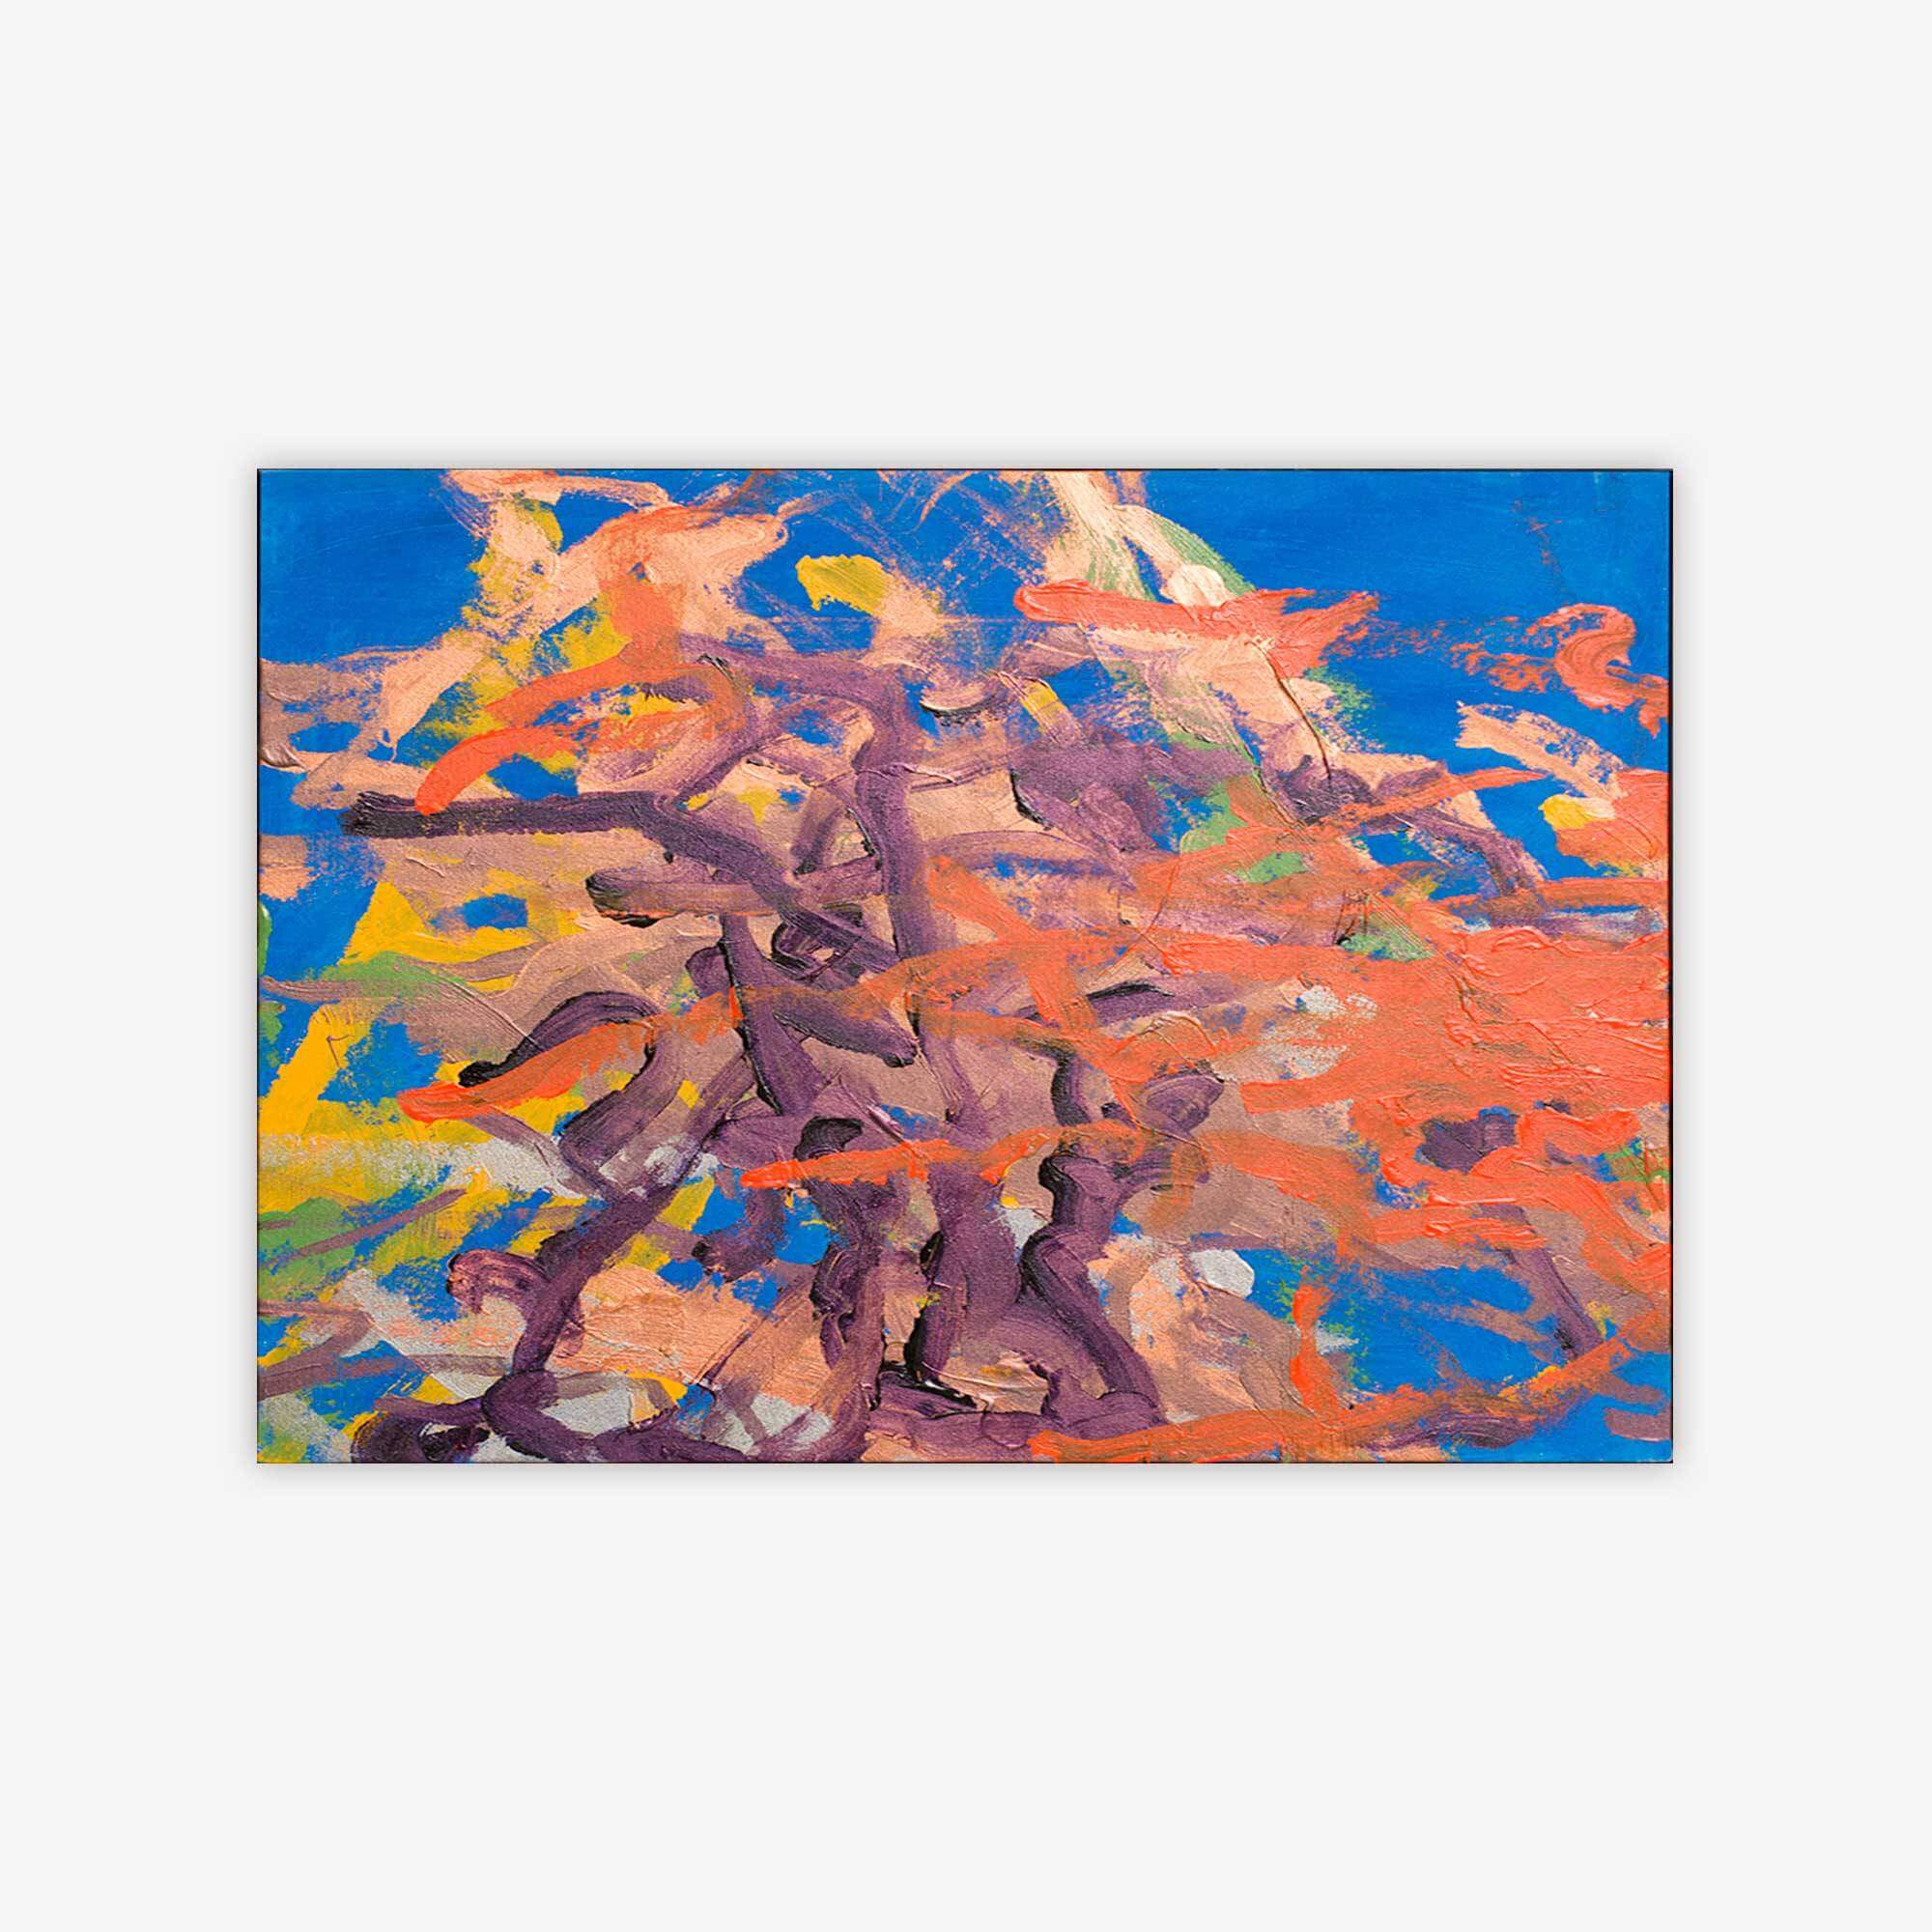 "Untitled" abstract painting by artist Teddy Dobrich with amorphous shapes and pattern in shades of orange, pink, purple, and yellow on a blue background.